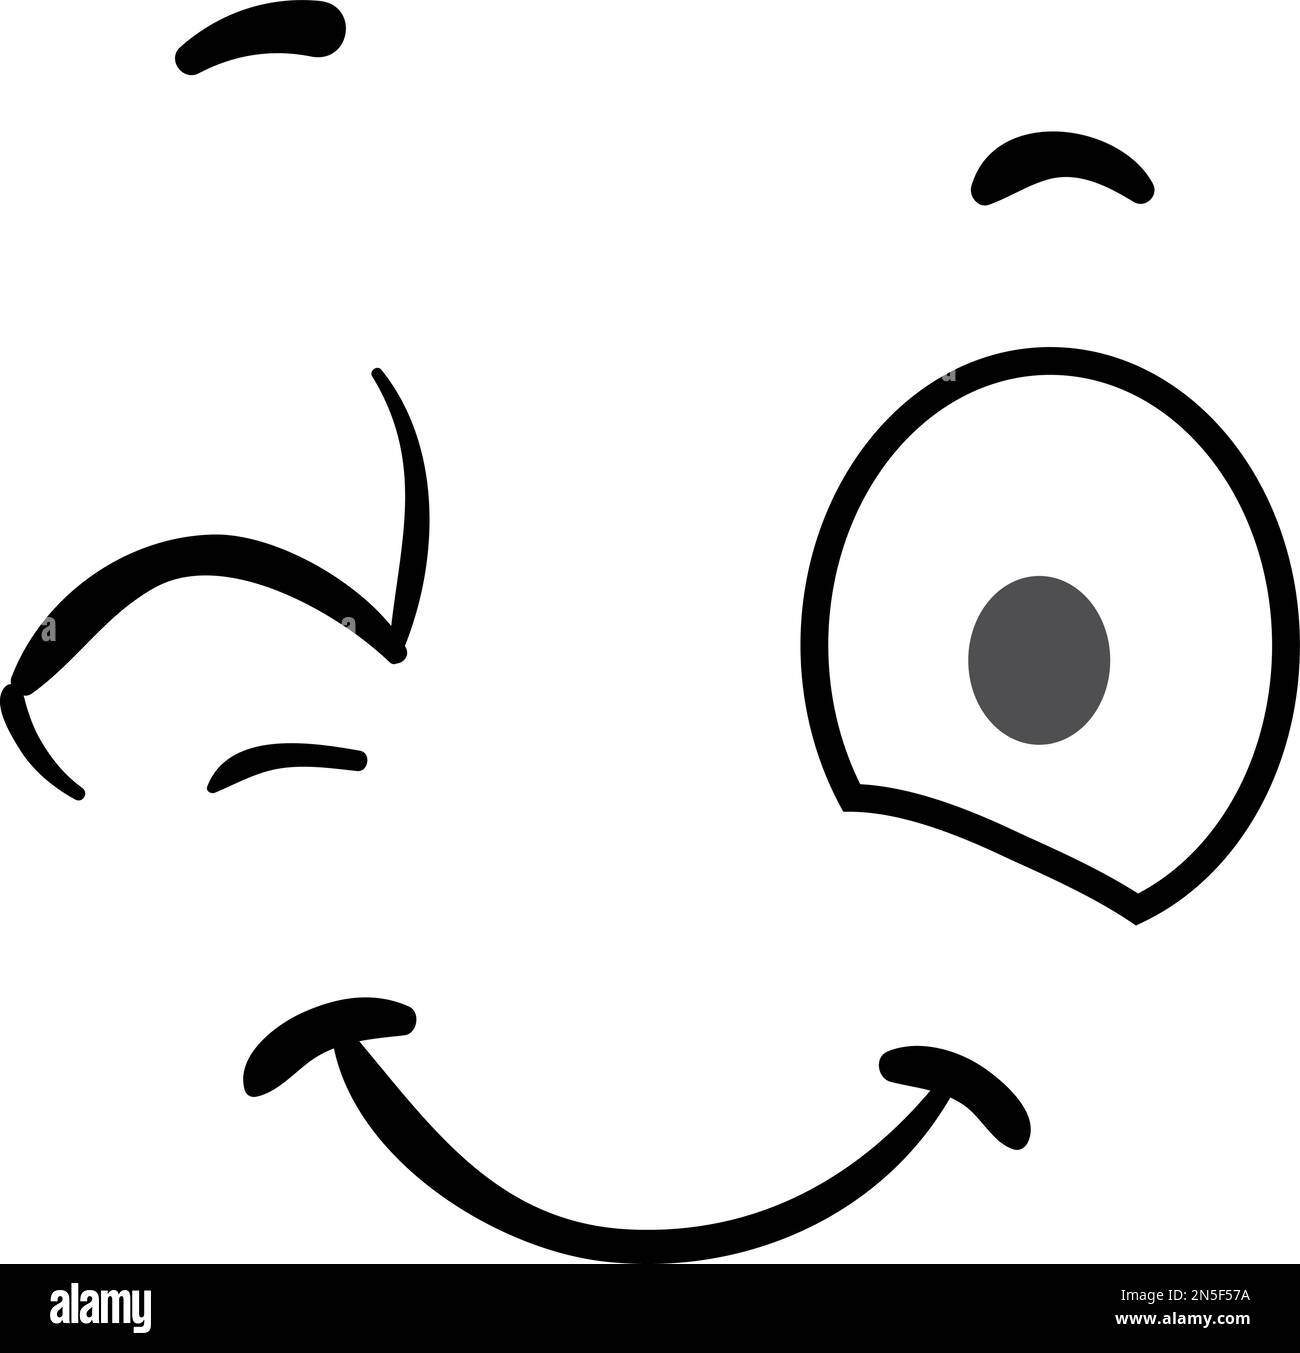 Winked eye comic face. Cartoon emotion expression Stock Vector